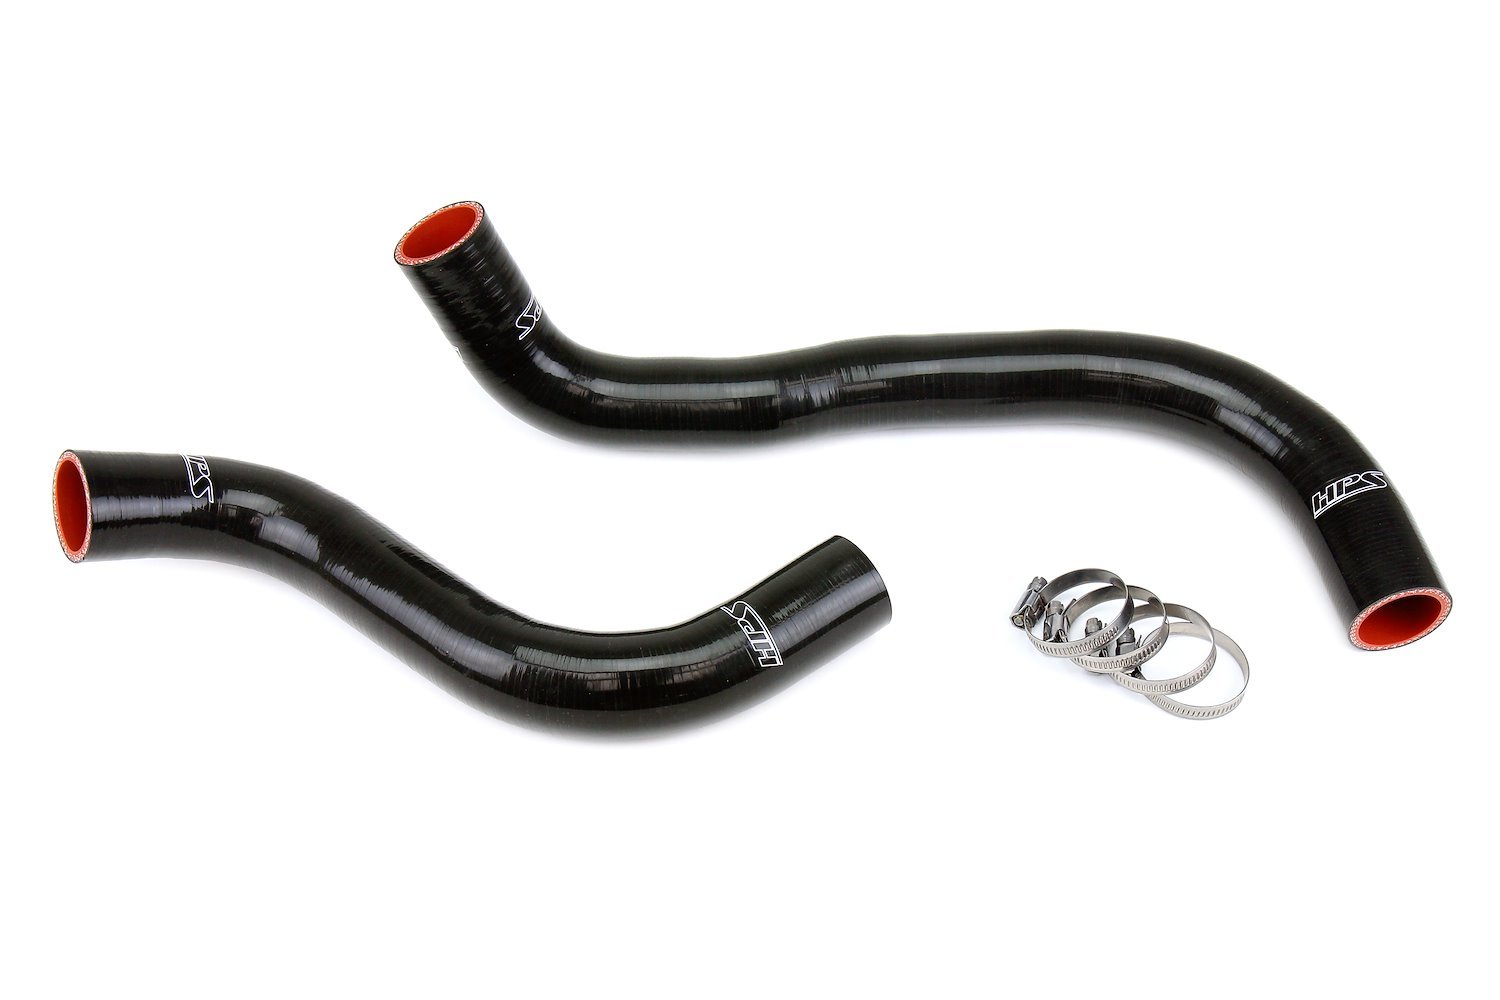 57-1828-BLK Radiator Hose Kit, 3-Ply Reinforced Silicone, Replaces Rubber Radiator Coolant Hoses